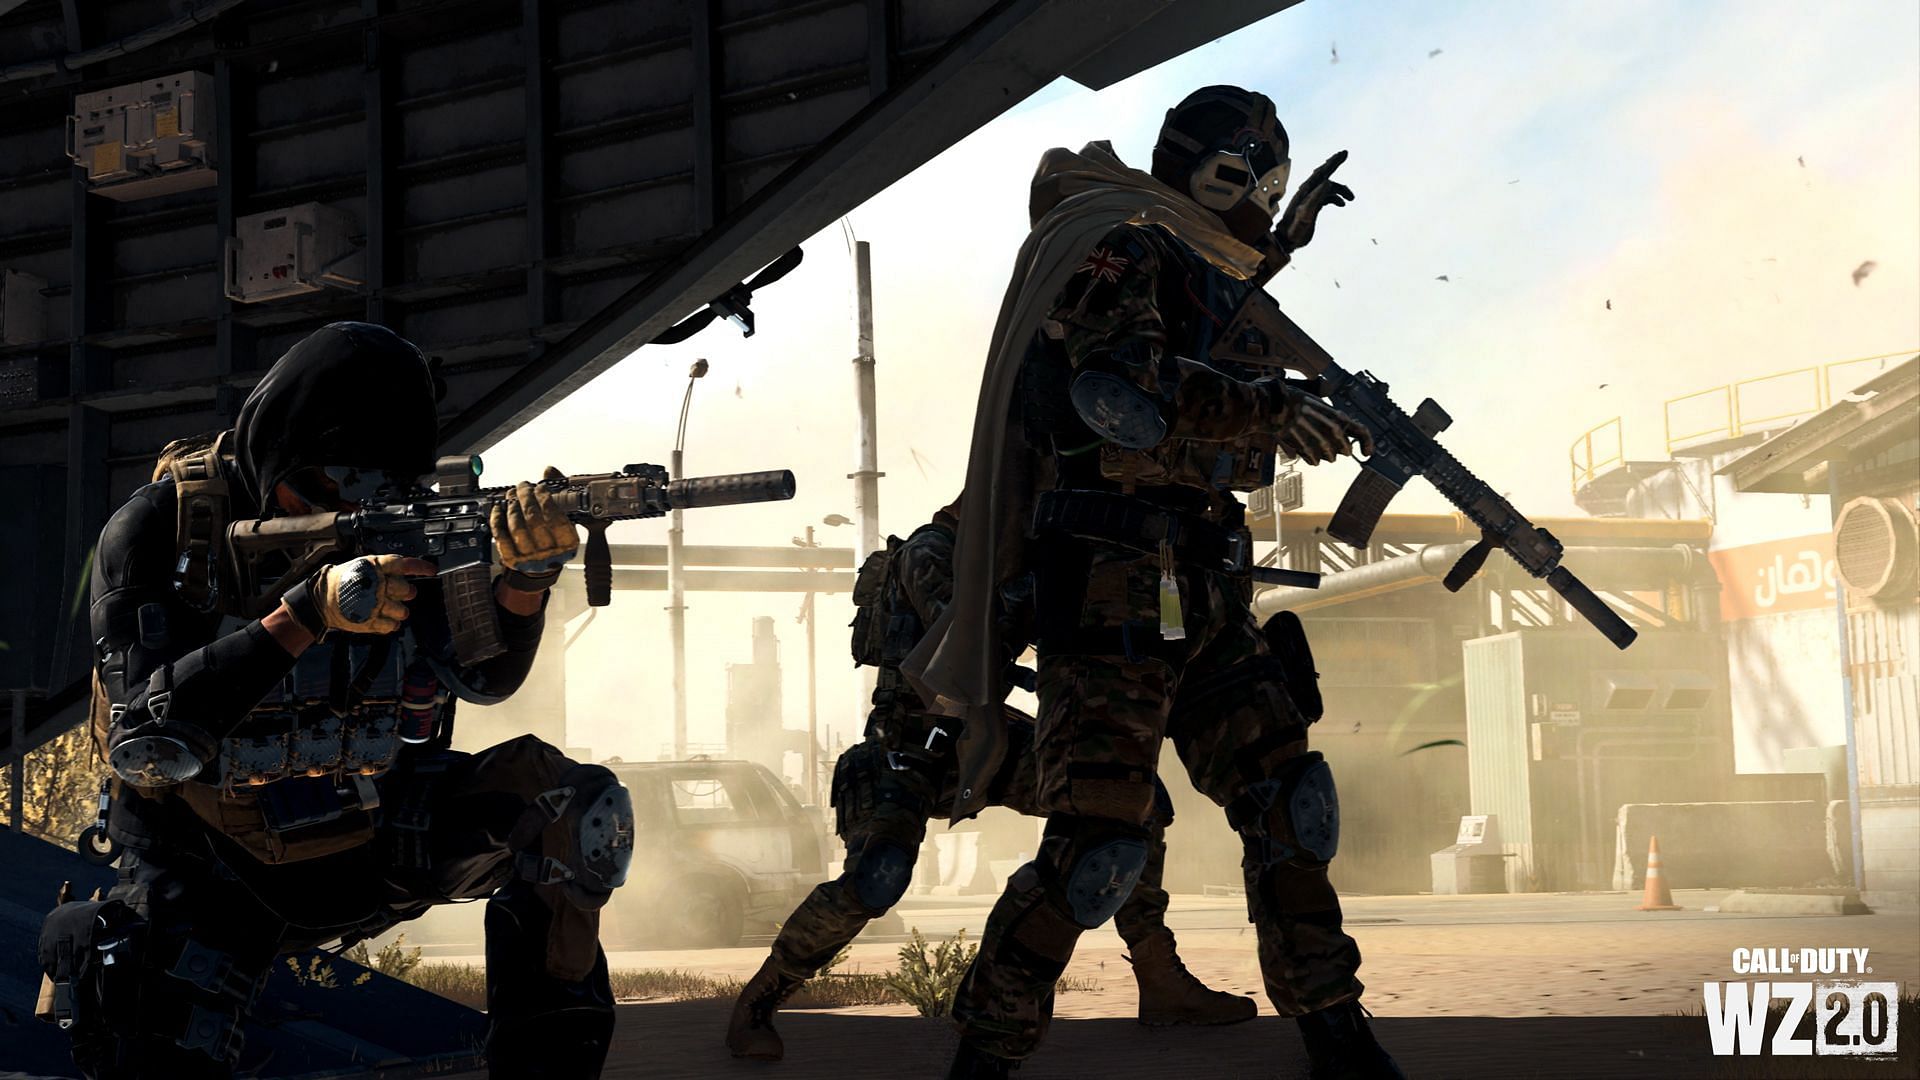 Call of Duty: Warzone is the best battle royale since Fortnite